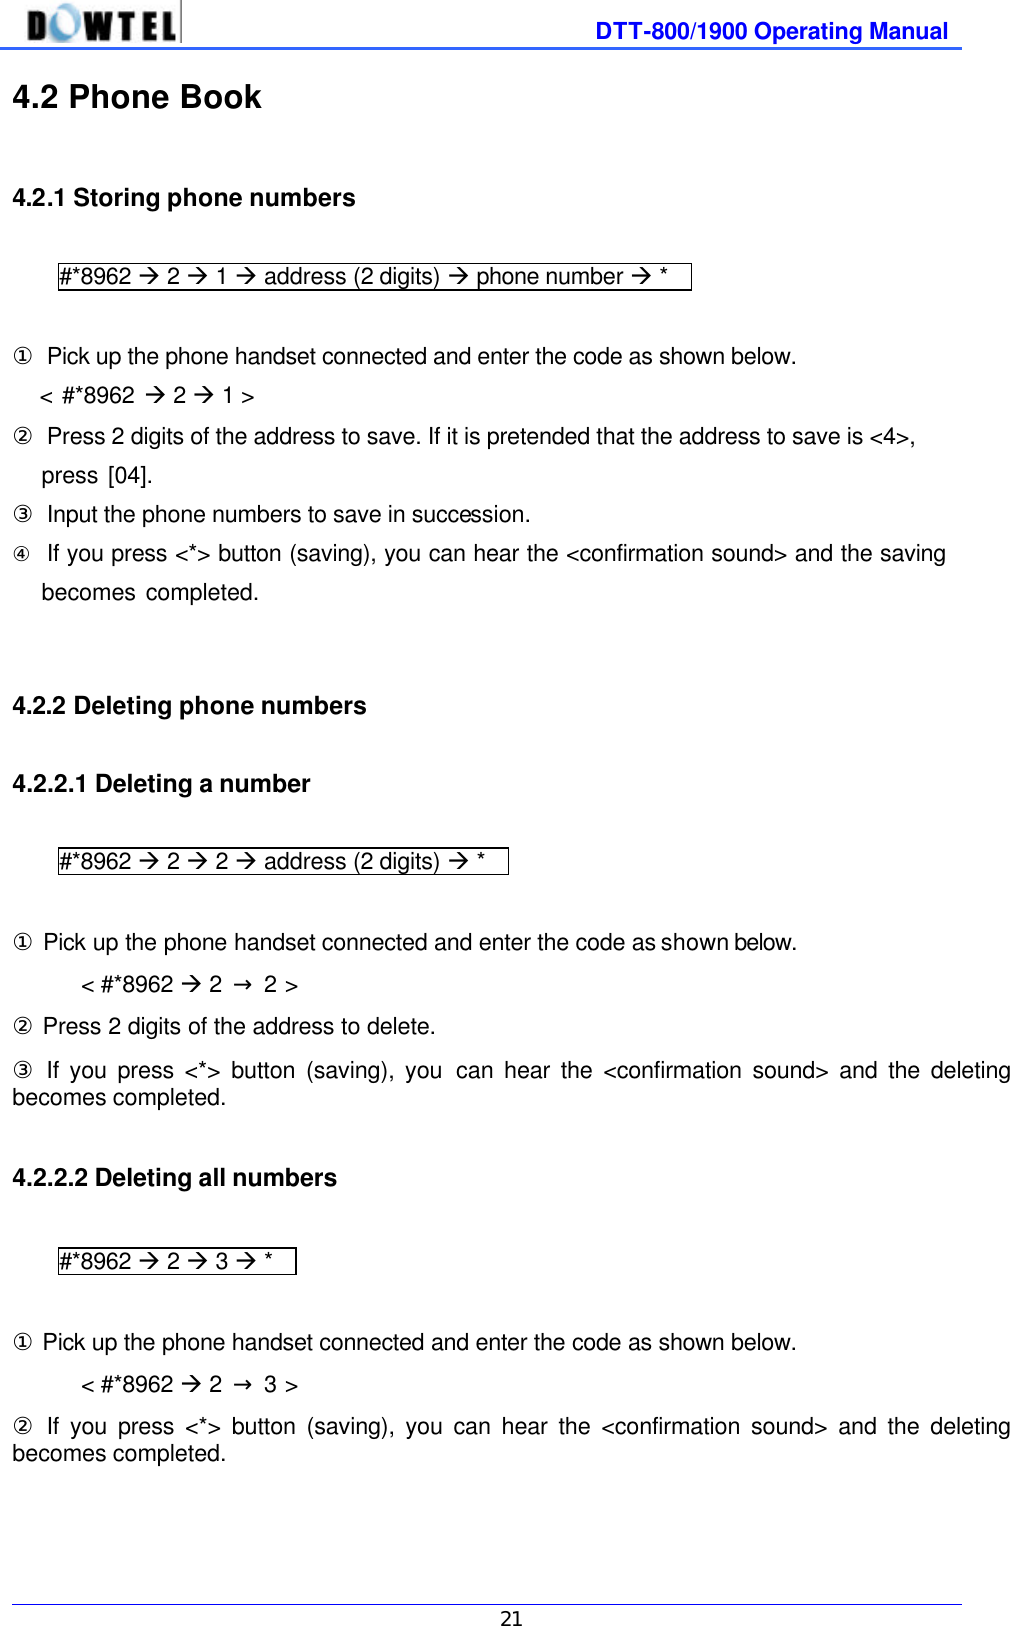              DTT-800/1900 Operating Manual   21 4.2 Phone Book  4.2.1 Storing phone numbers  #*8962 à 2 à 1 à address (2 digits) à phone number à *    ① Pick up the phone handset connected and enter the code as shown below.    &lt; #*8962 à 2 à 1 &gt;   ② Press 2 digits of the address to save. If it is pretended that the address to save is &lt;4&gt;,      press [04]. ③ Input the phone numbers to save in succession. ④ If you press &lt;*&gt; button (saving), you can hear the &lt;confirmation sound&gt; and the saving          becomes completed.              4.2.2 Deleting phone numbers  4.2.2.1 Deleting a number  #*8962 à 2 à 2 à address (2 digits) à *    ① Pick up the phone handset connected and enter the code as shown below. &lt; #*8962 à 2  → 2 &gt;   ② Press 2 digits of the address to delete. ③ If you press &lt;*&gt; button (saving), you can hear the &lt;confirmation sound&gt; and the deleting becomes completed.  4.2.2.2 Deleting all numbers  #*8962 à 2 à 3 à *    ① Pick up the phone handset connected and enter the code as shown below. &lt; #*8962 à 2  → 3 &gt;   ② If you press &lt;*&gt; button (saving), you can hear the &lt;confirmation sound&gt; and the deleting becomes completed.